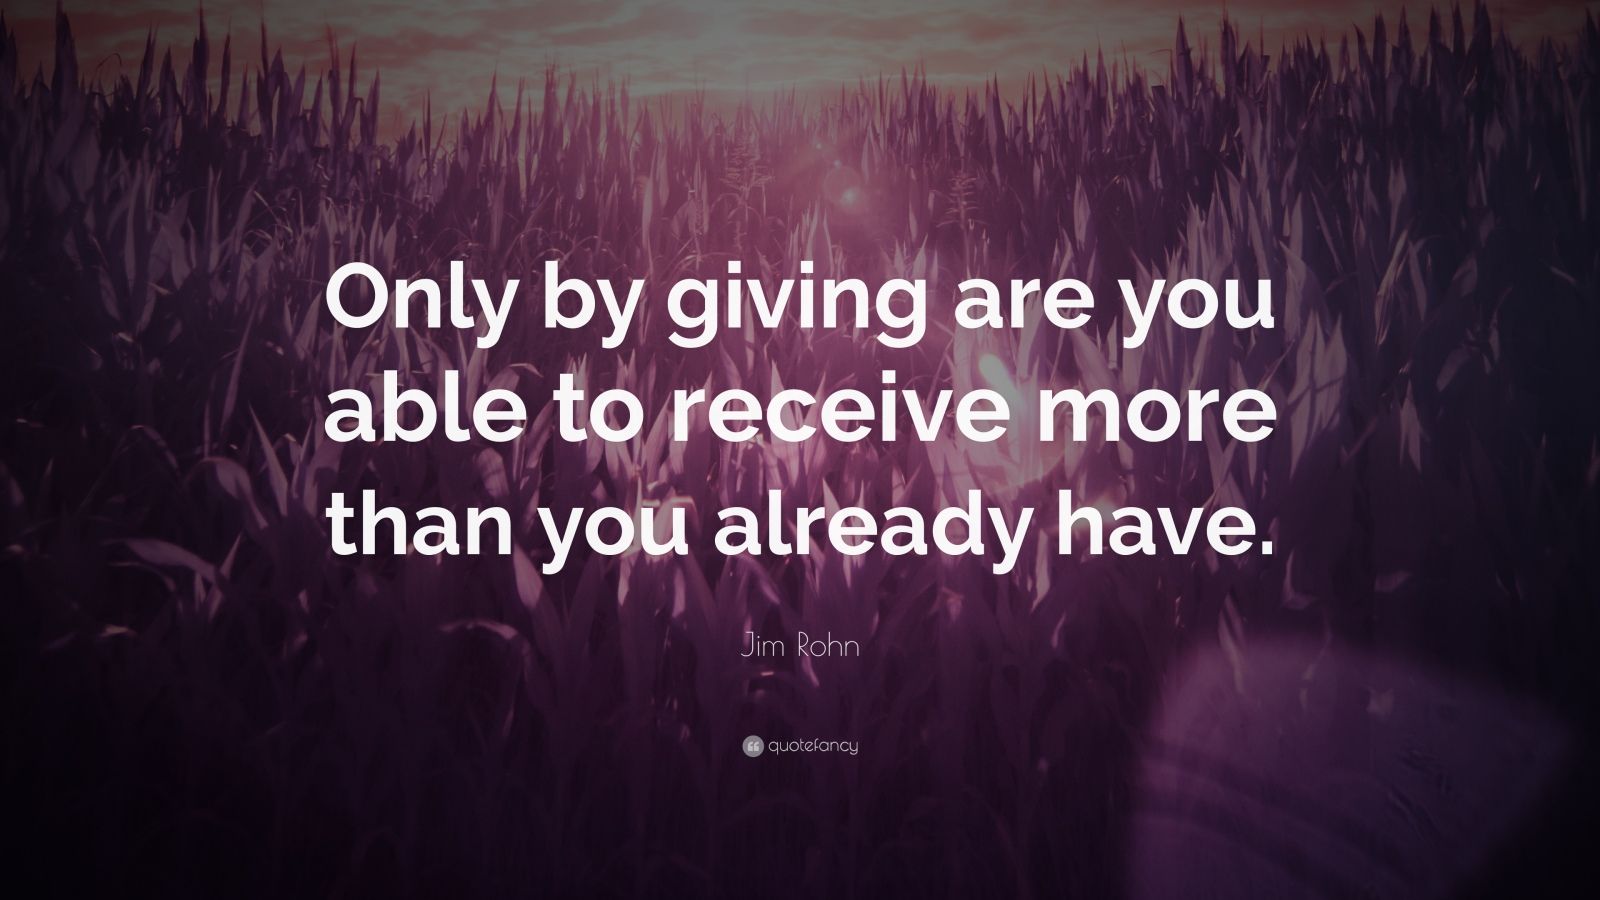 Jim Rohn Quote “Only by giving are you able to receive